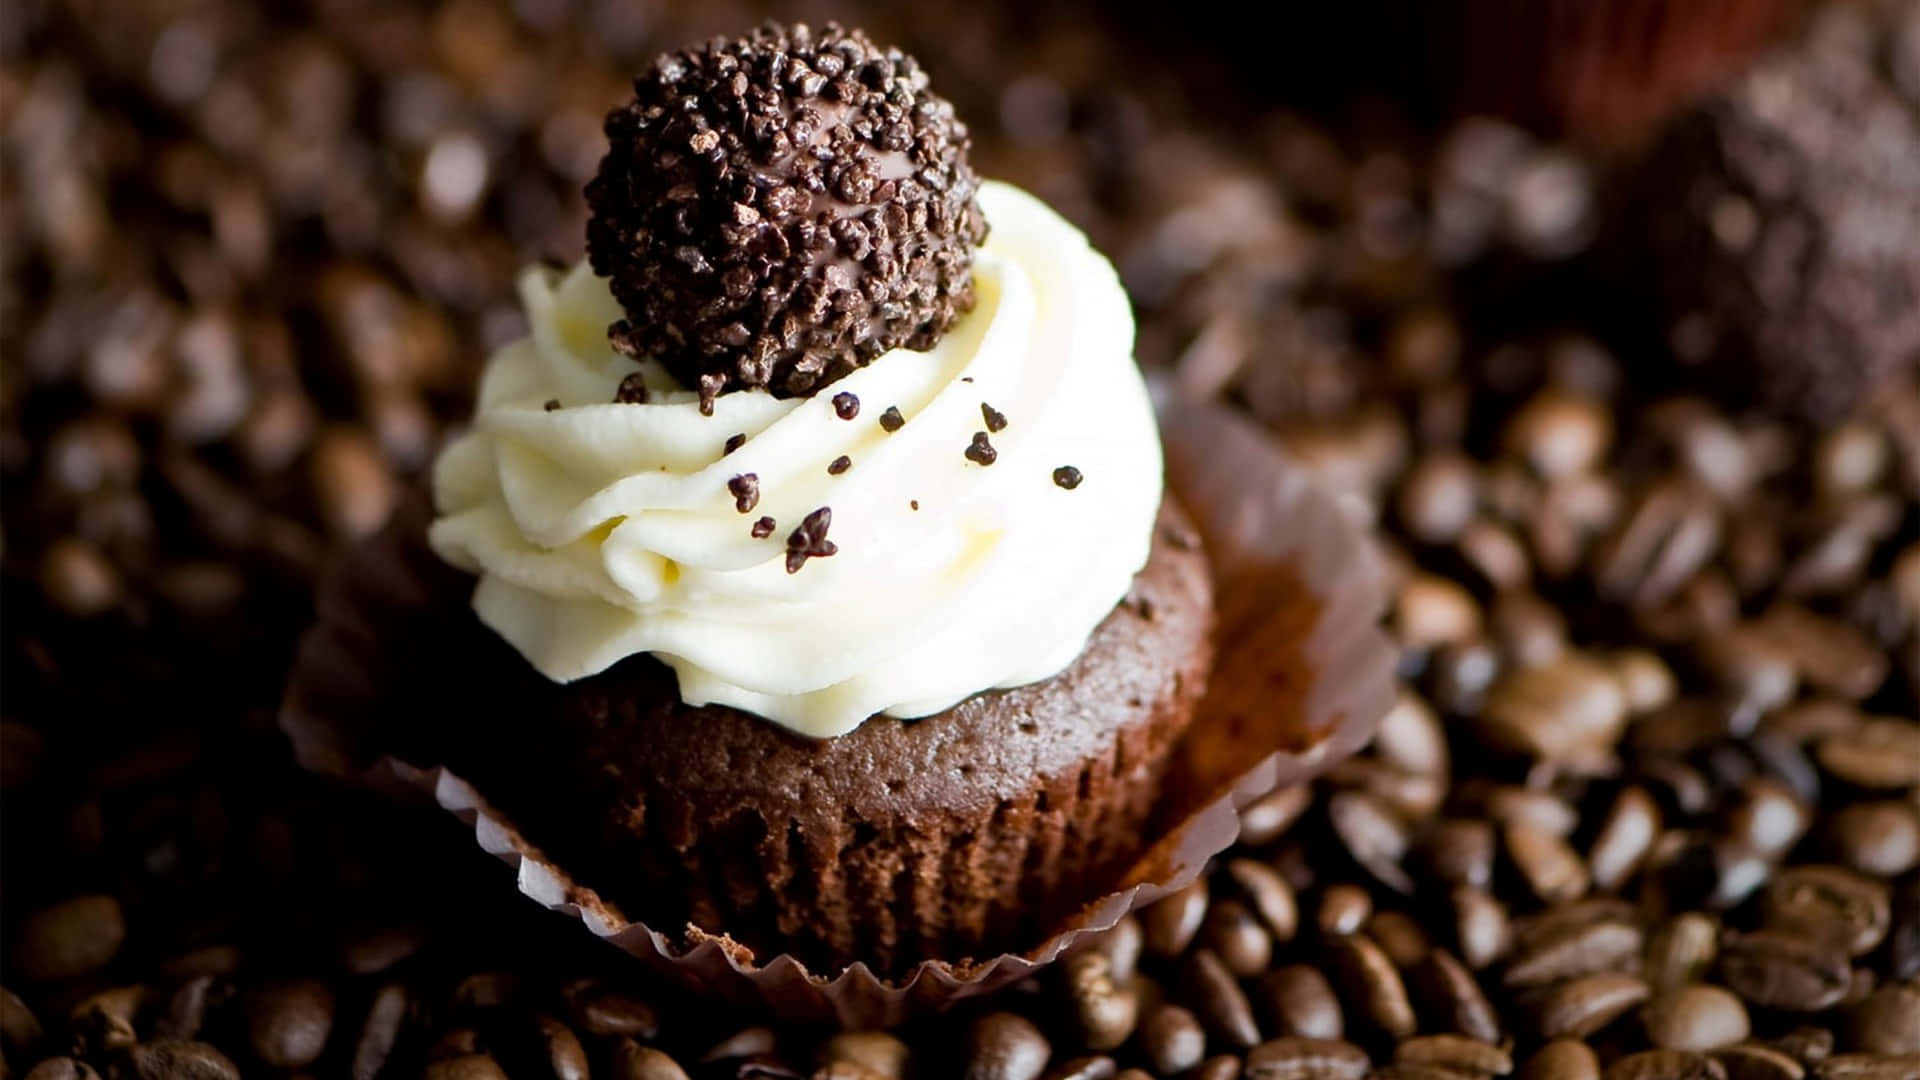 A Cupcake With A White Frosting On Top Of Coffee Beans